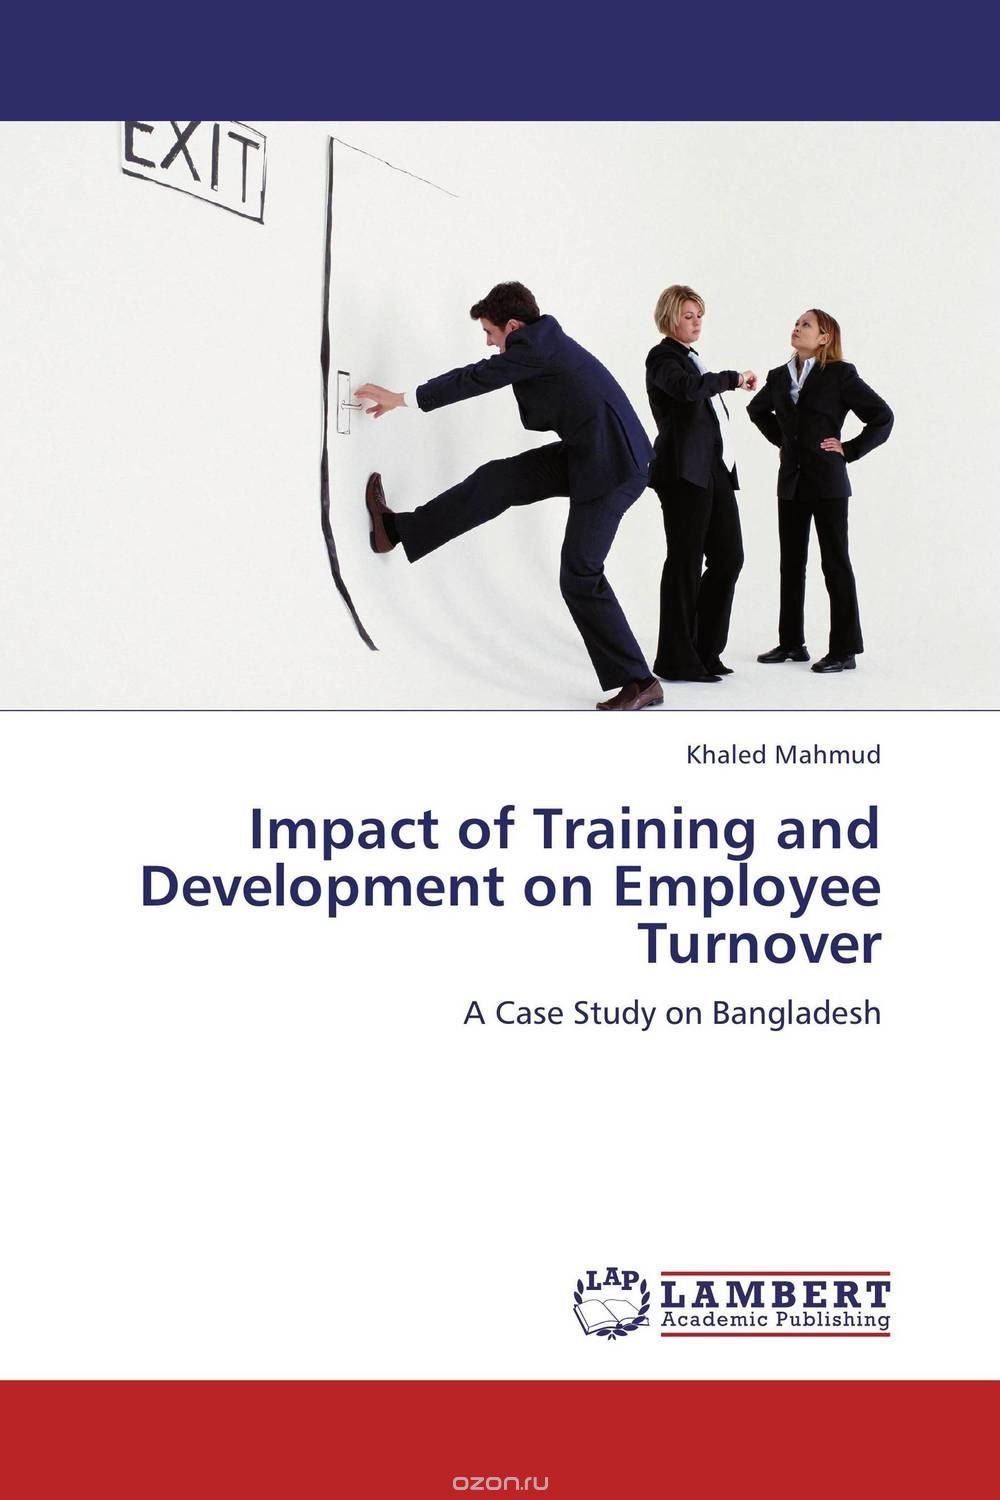 Impact of Training and Development on Employee Turnover